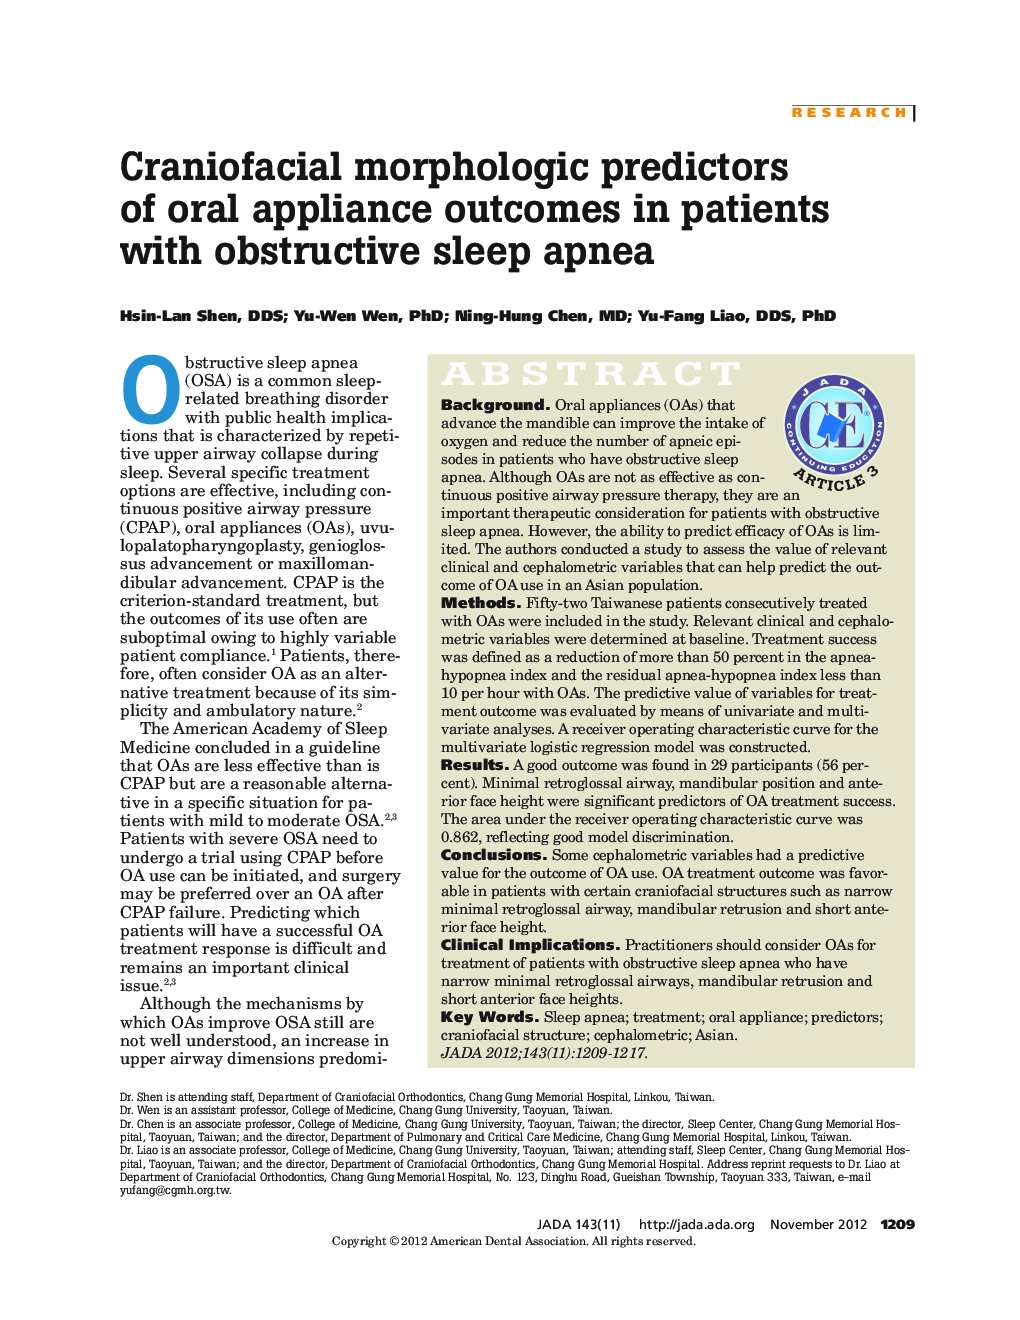 Craniofacial morphologic predictors of oral appliance outcomes in patients with obstructive sleep apnea 